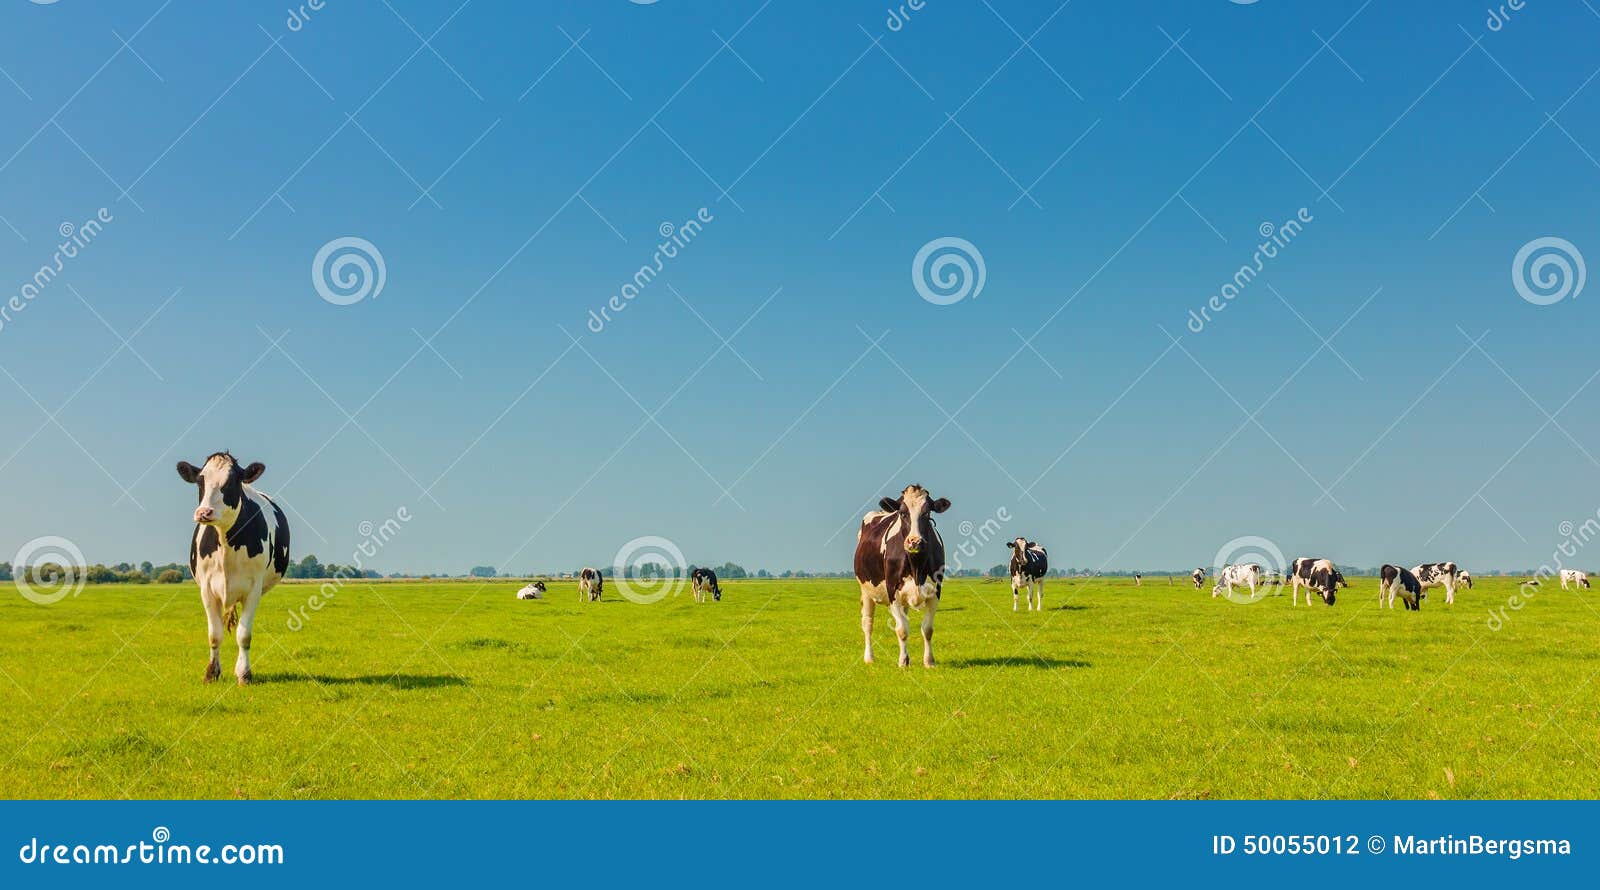 panoramic image of milk cows in the dutch province of friesland